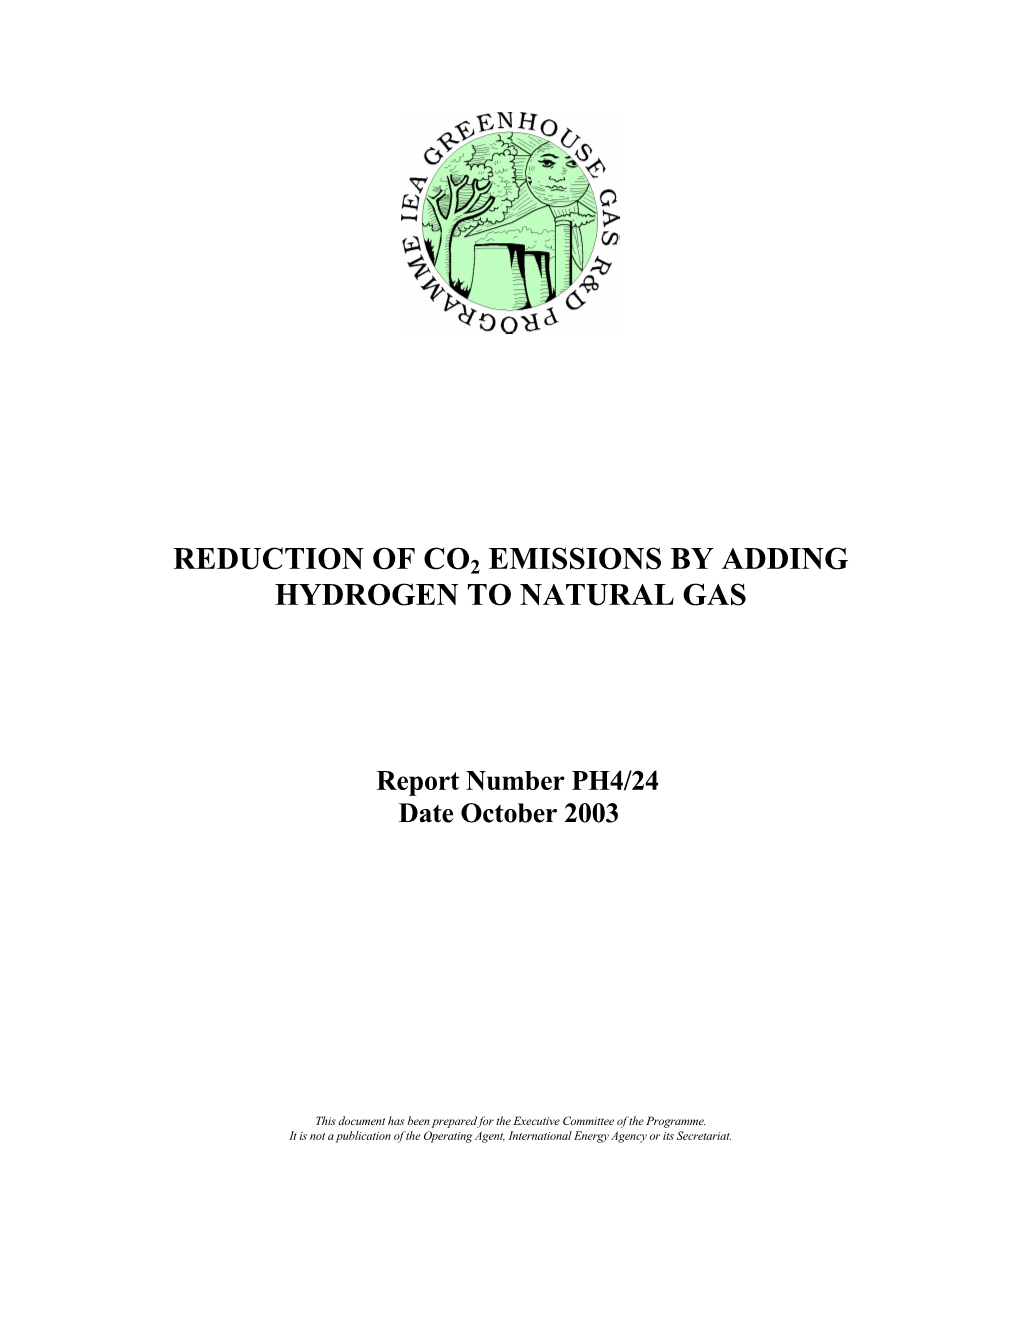 Reduction of Co2 Emissions by Adding Hydrogen to Natural Gas